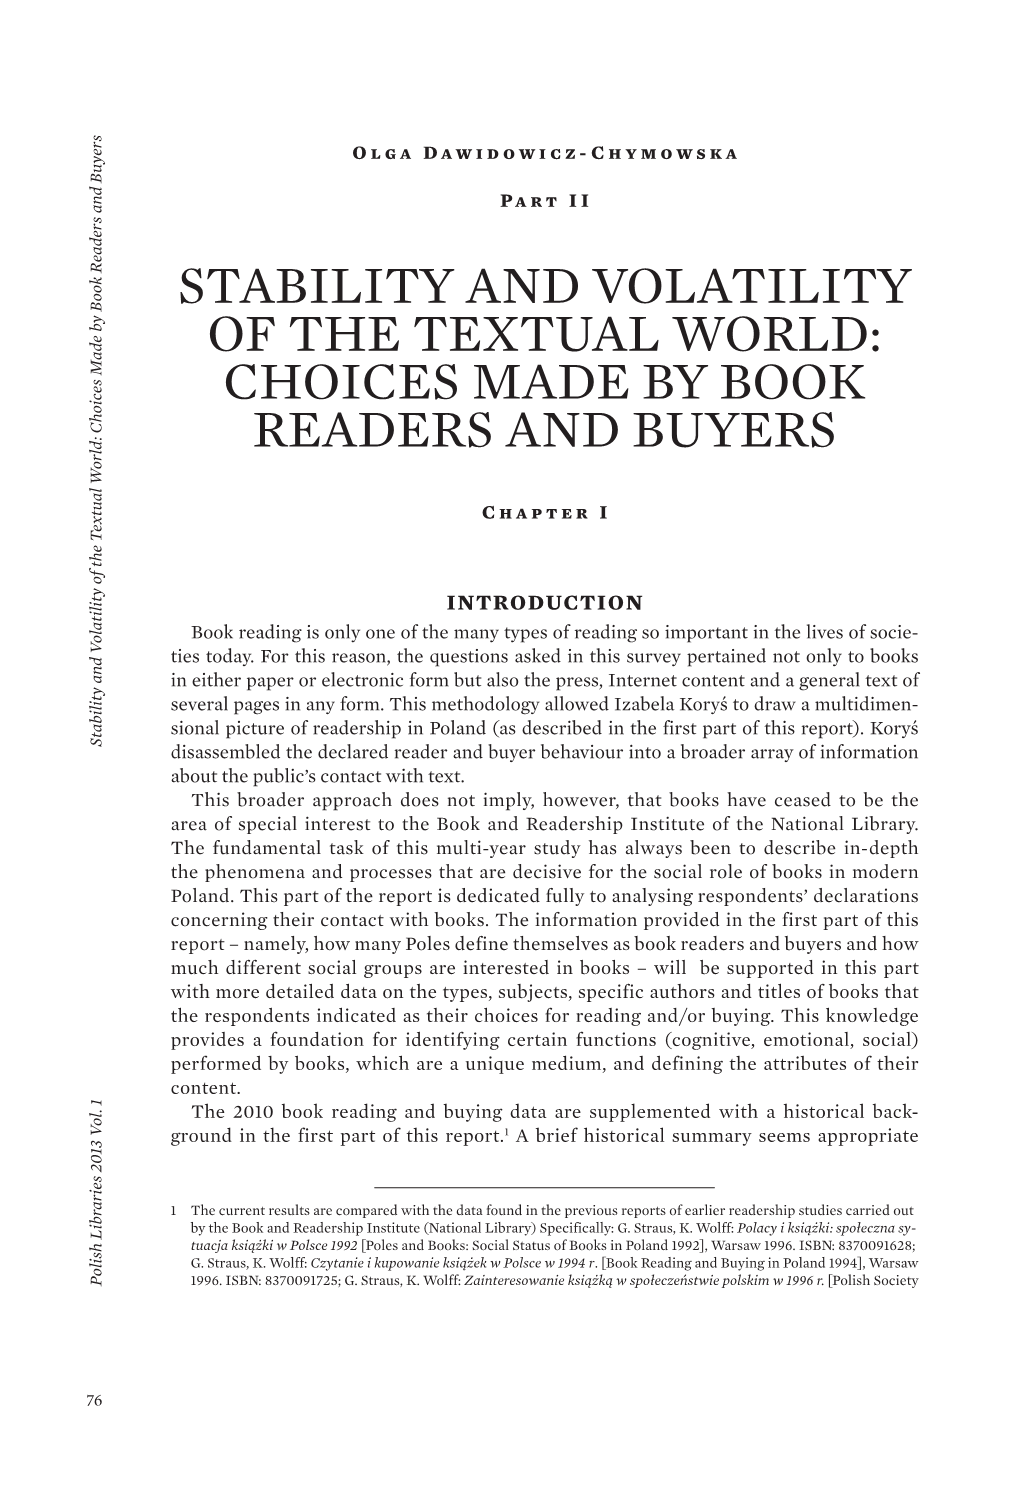 Stability and Volatility of the Textual World: Choices Made by Book Readers and Buyers